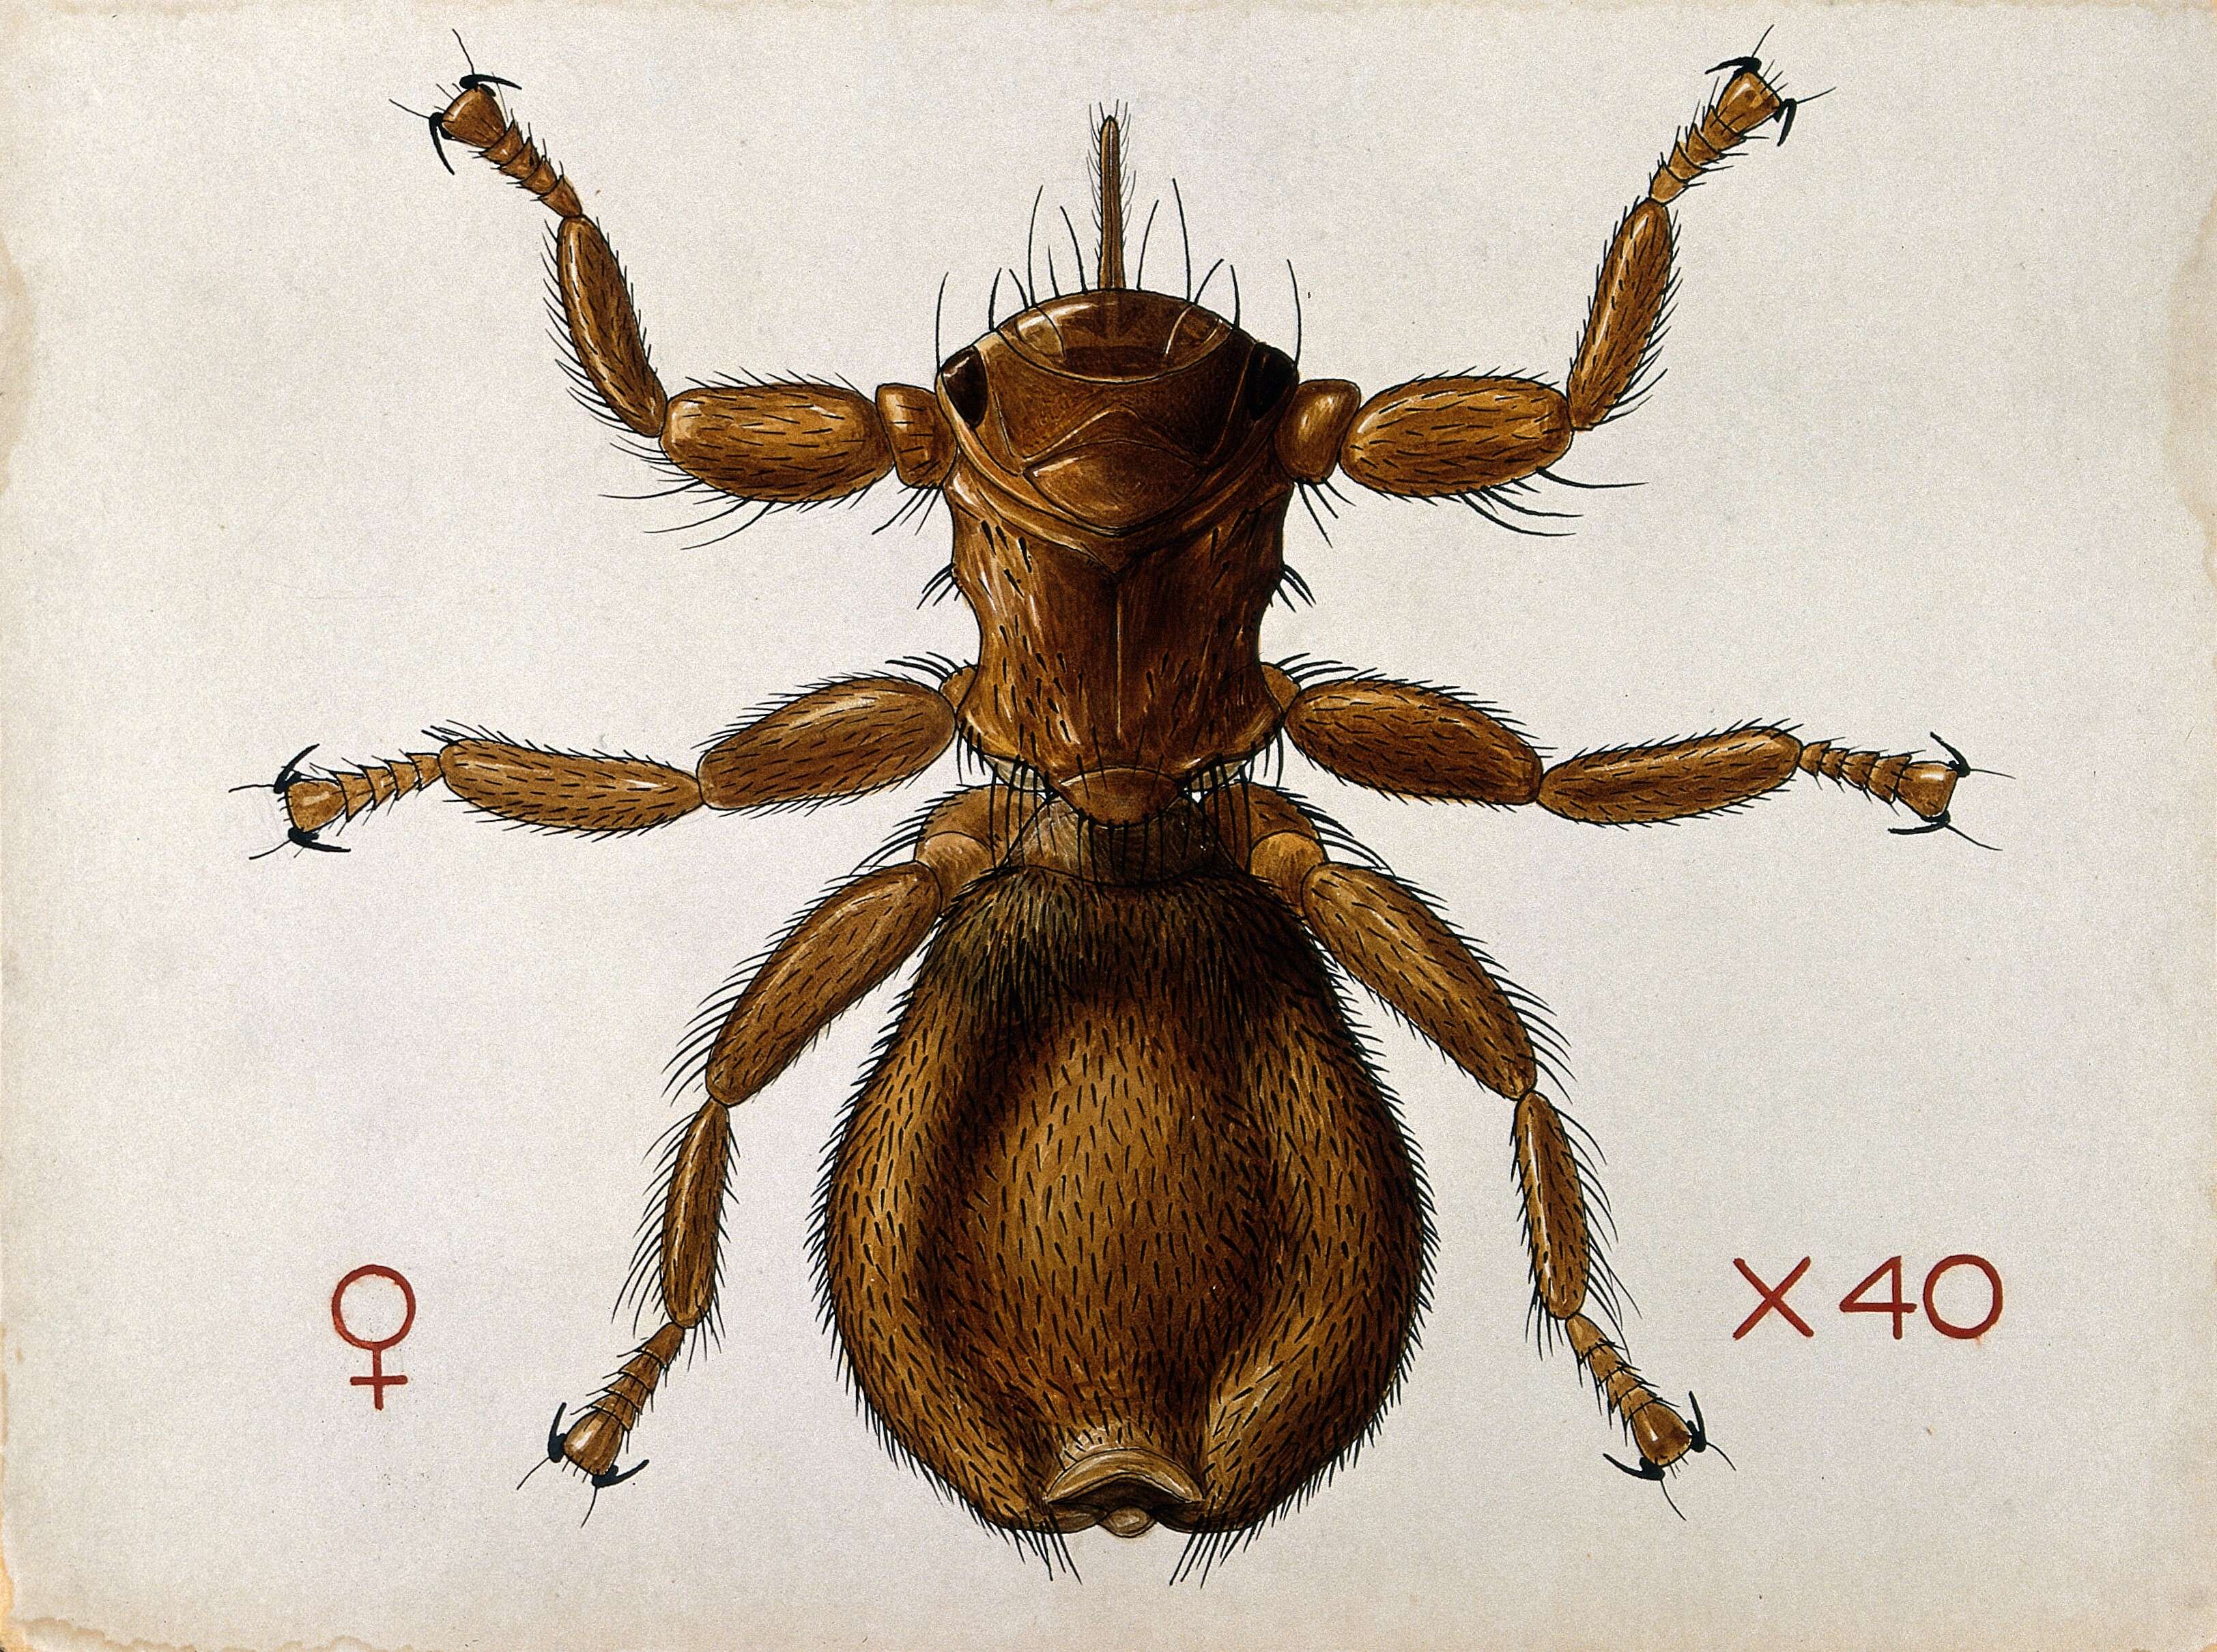 Image of Melophagus